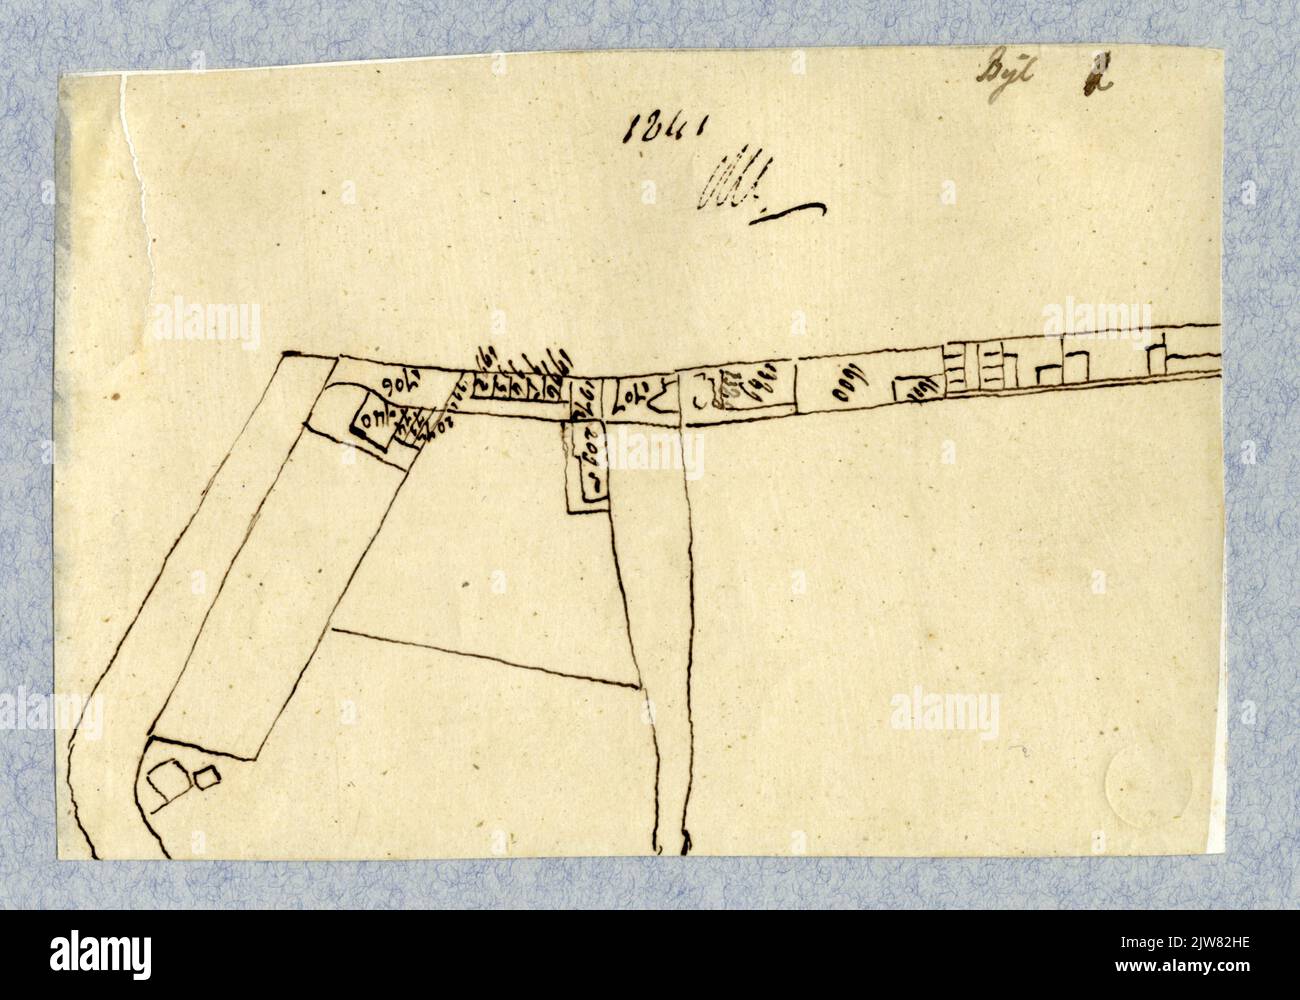 Sketch plan of a site lane along the Hopakker north of the Stadsbuitengracht in Utrecht; stating cadastral numbers. Stock Photo